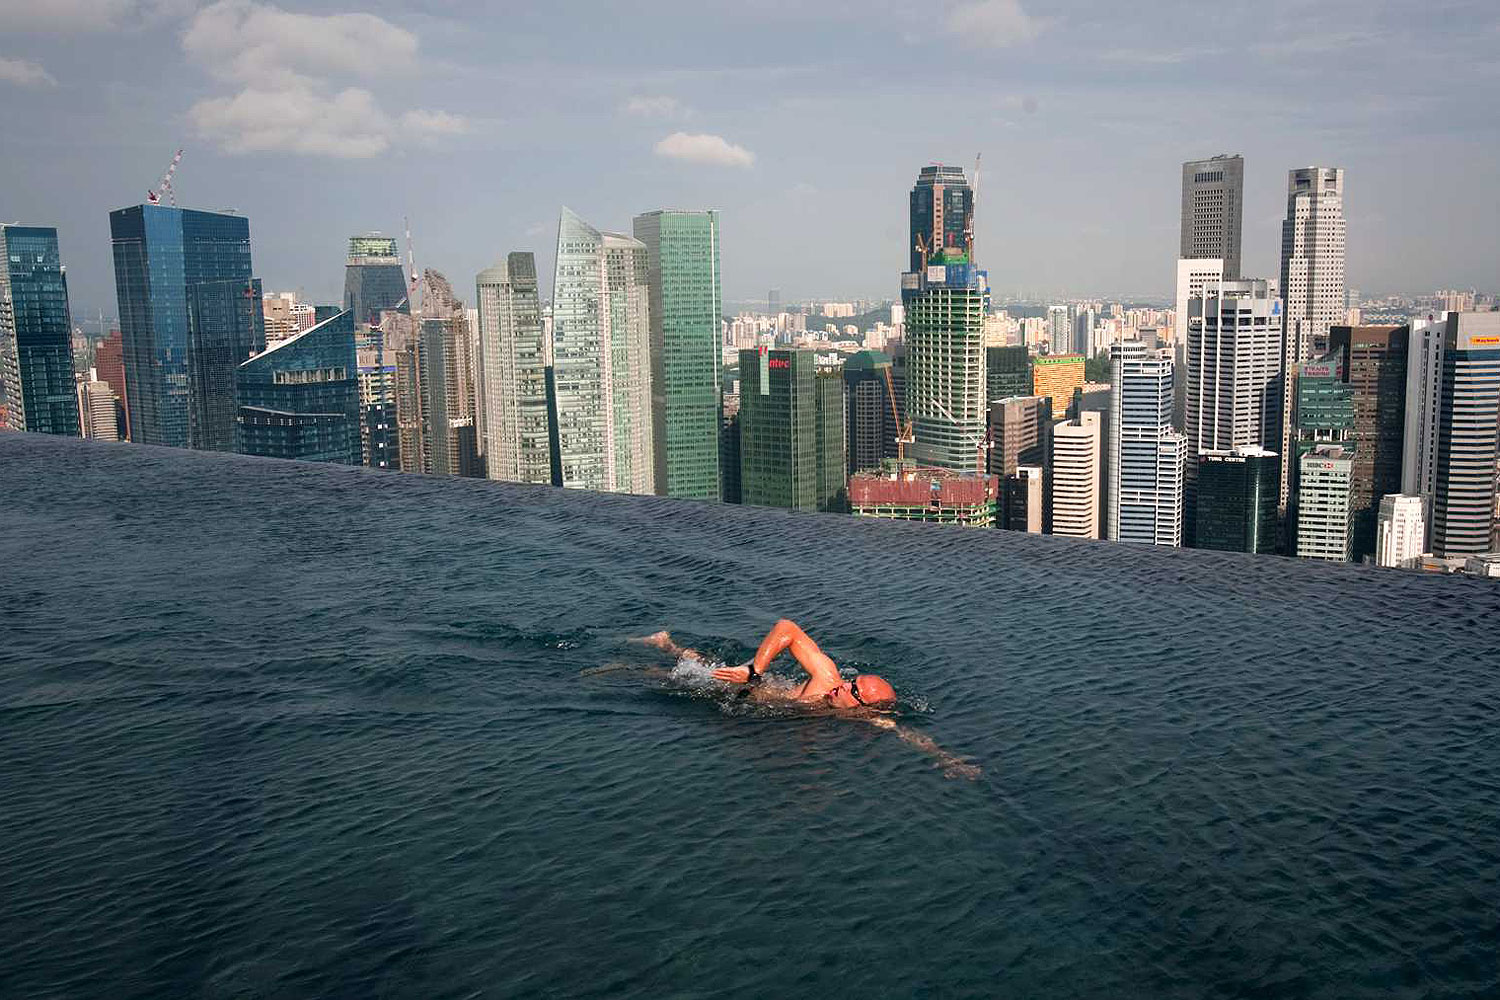 A guest swims in the infinity pool of the Skypark that tops the Marina Bay Sands hotel towers in Singapore June 24, 2010 (Vivek Prakash / Reuters)